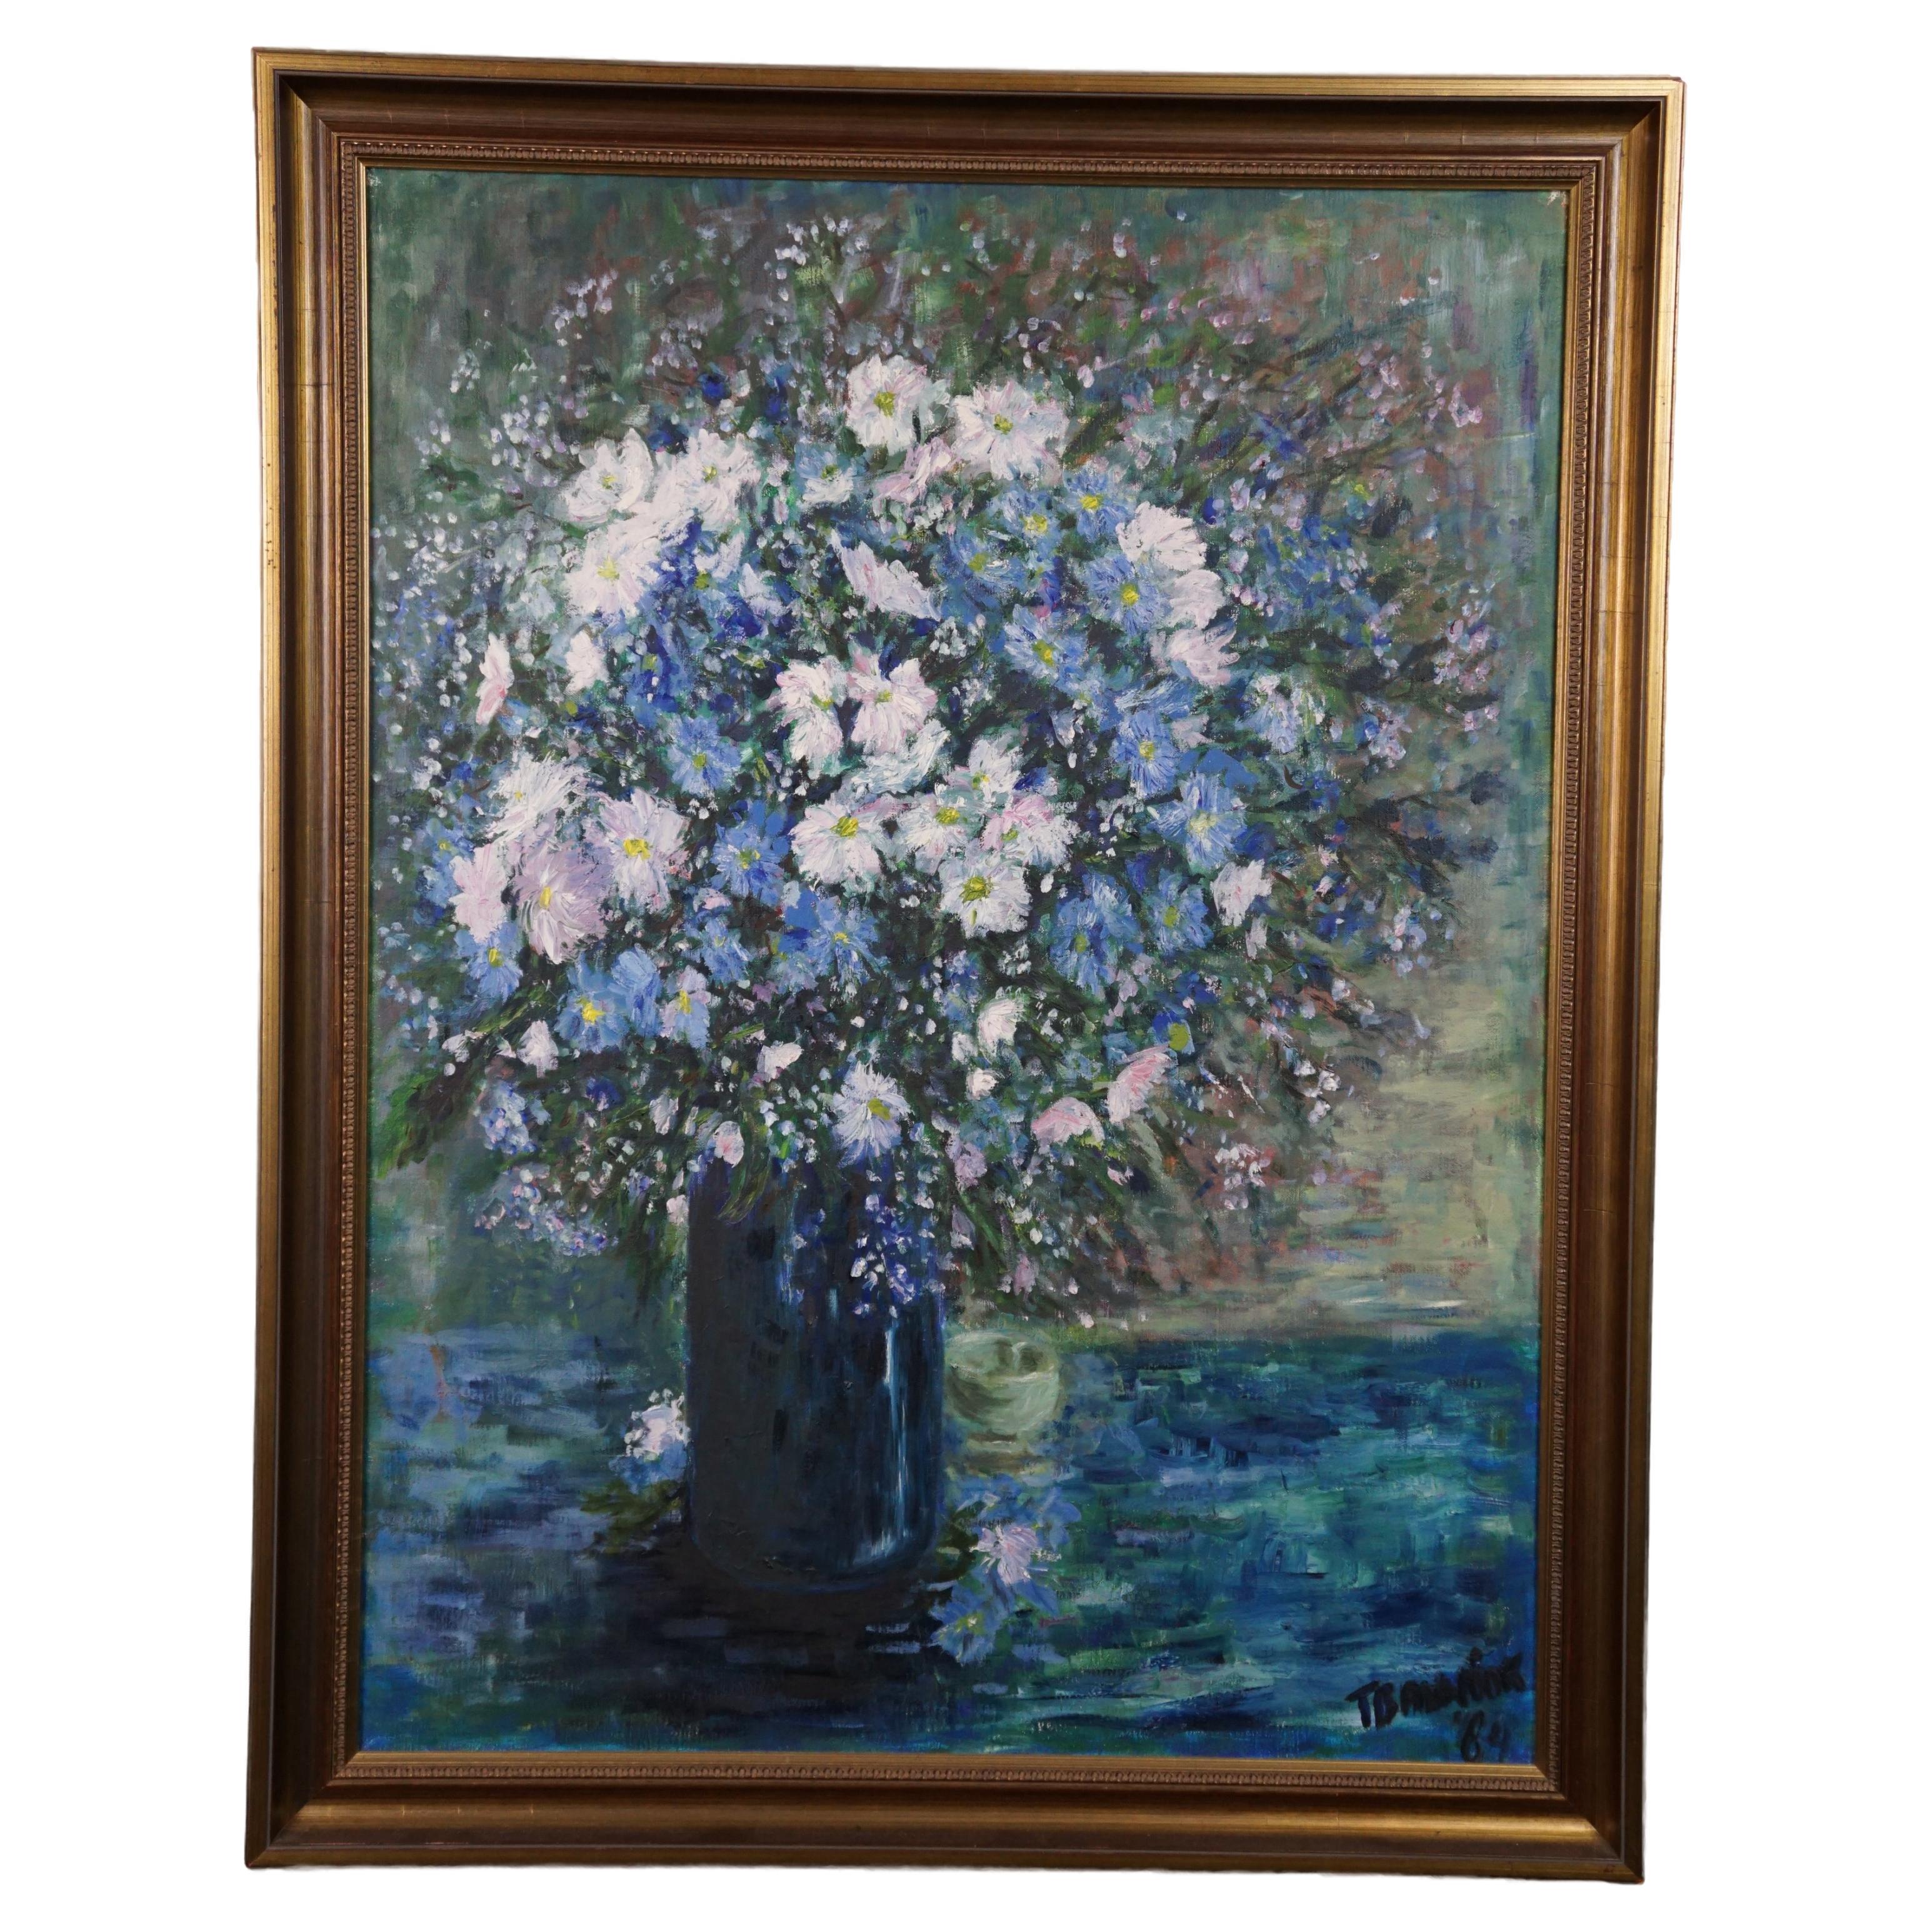 Painting with a still life of a vase with blue and white flowers.  For Sale